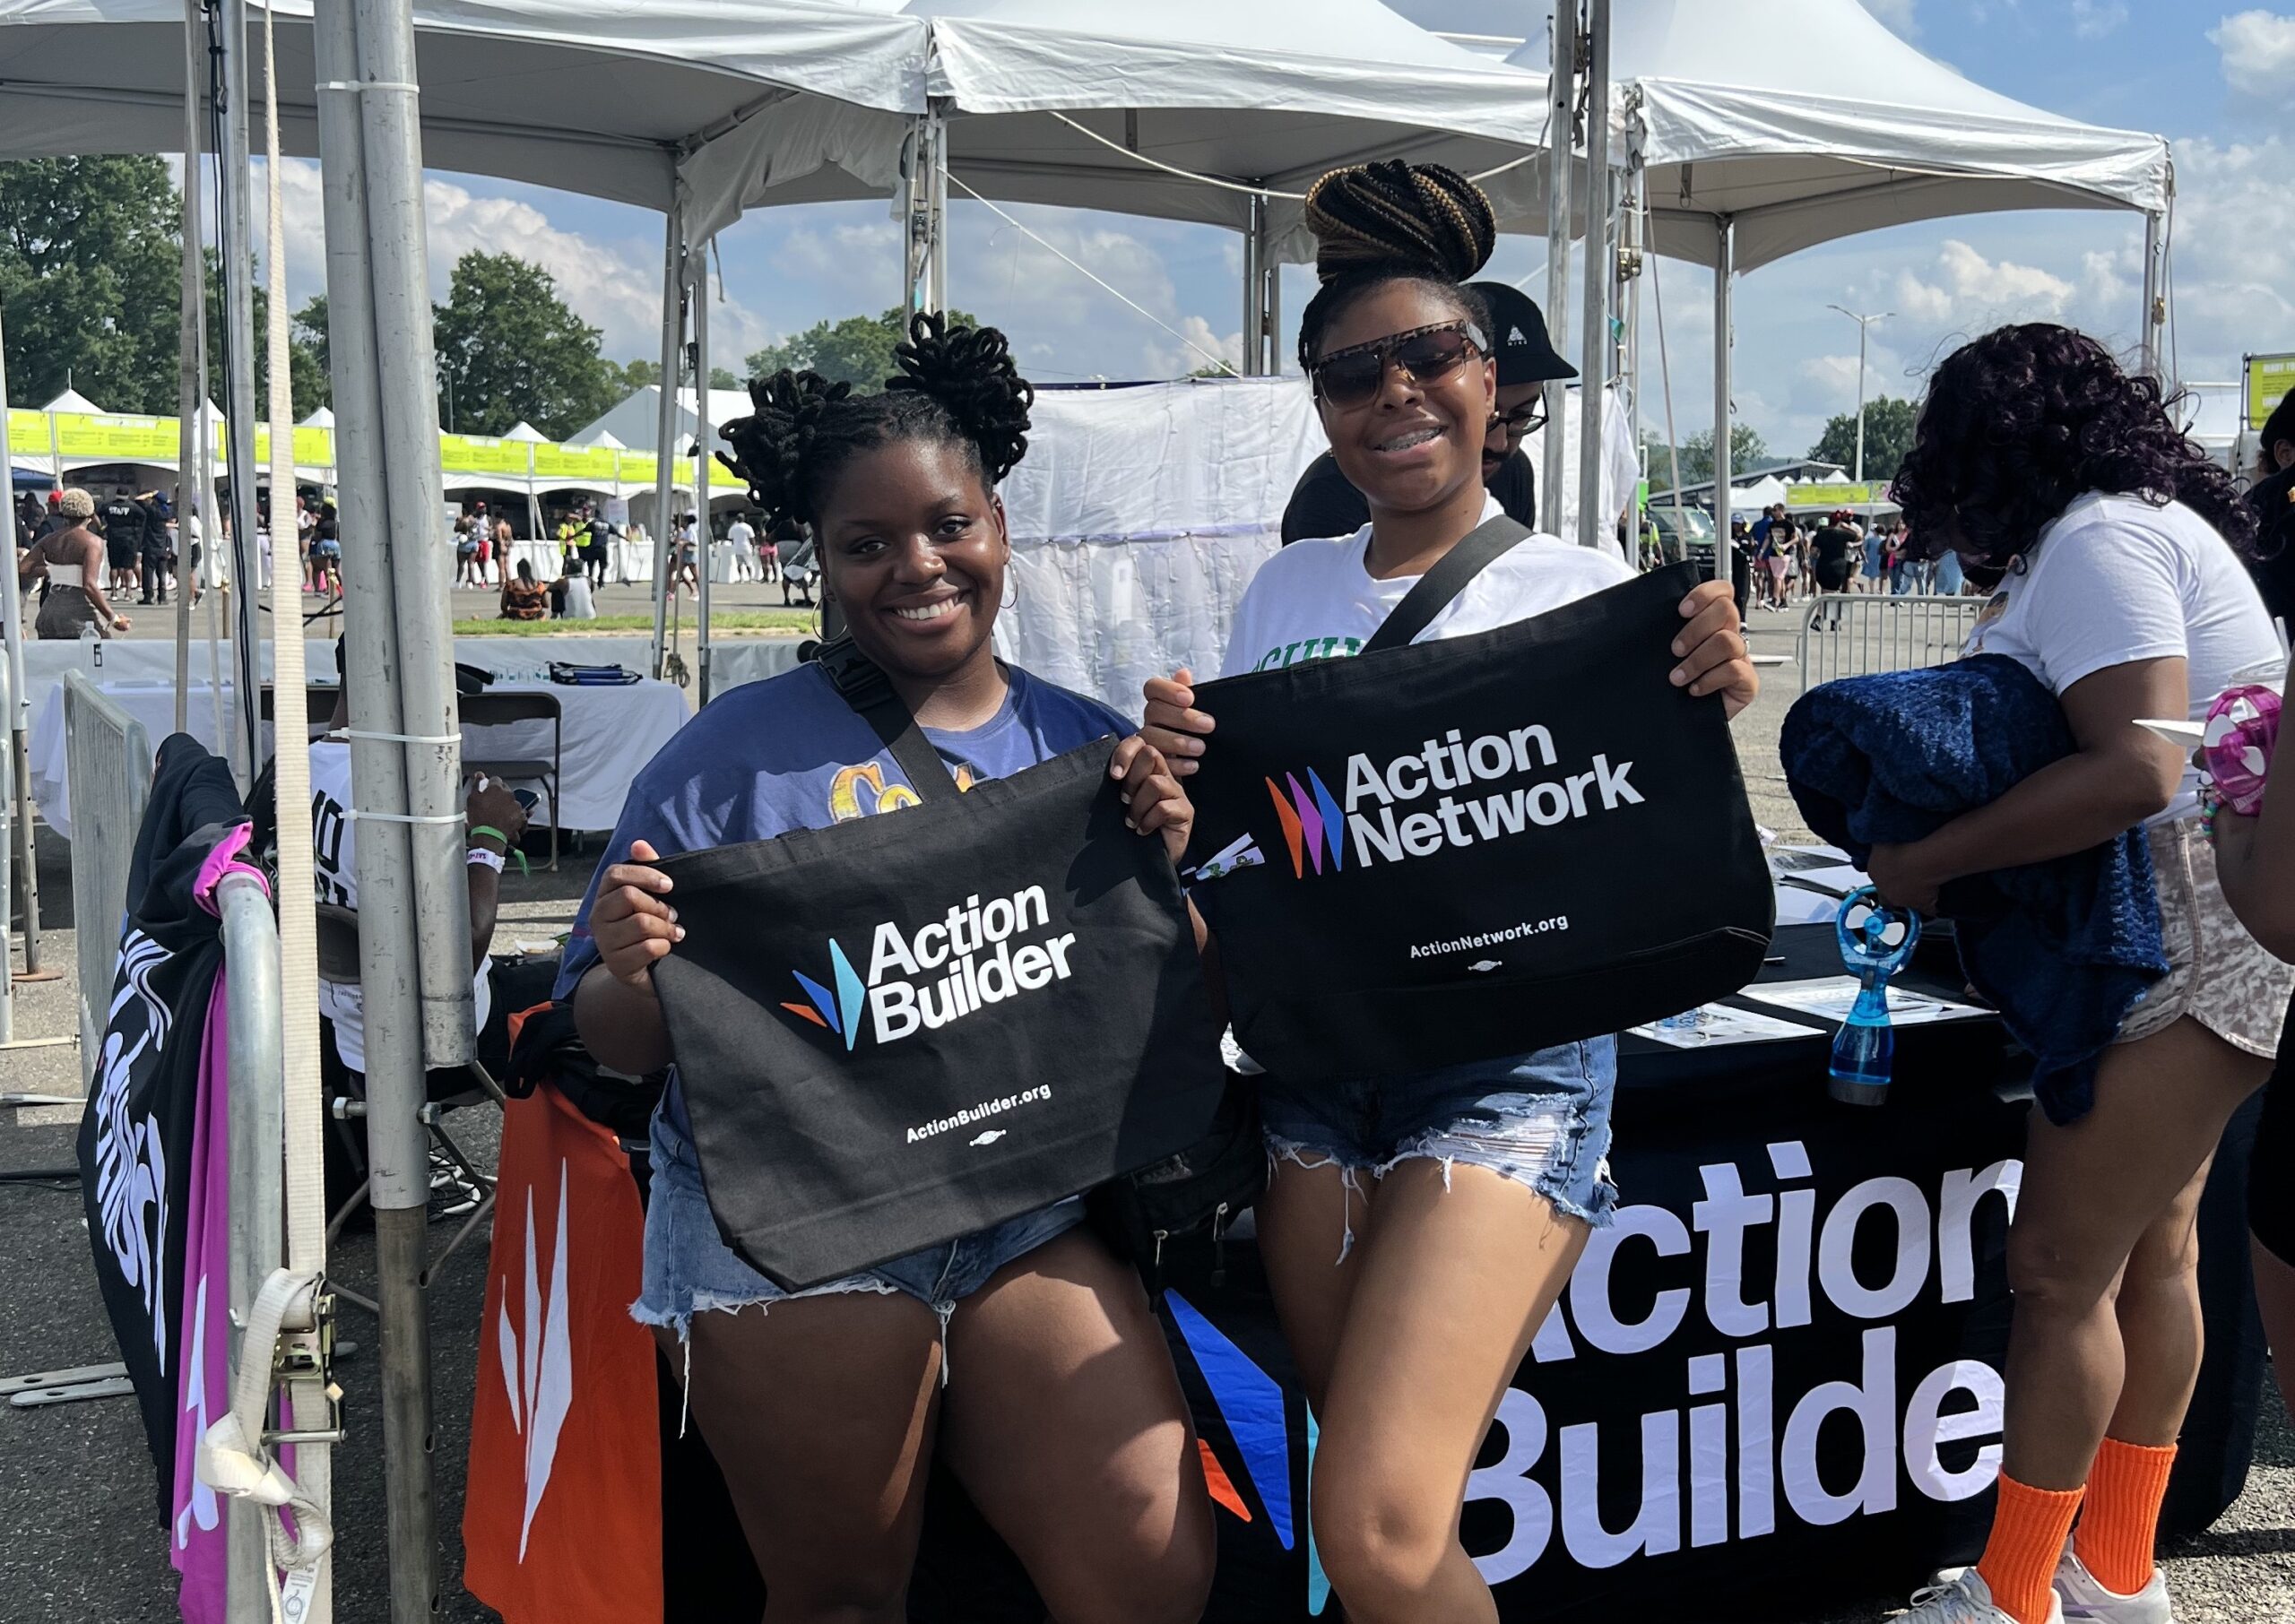 Broccoli City Festival attendees showing off their Action Network & Action Builder tote bags at the Action Network booth.